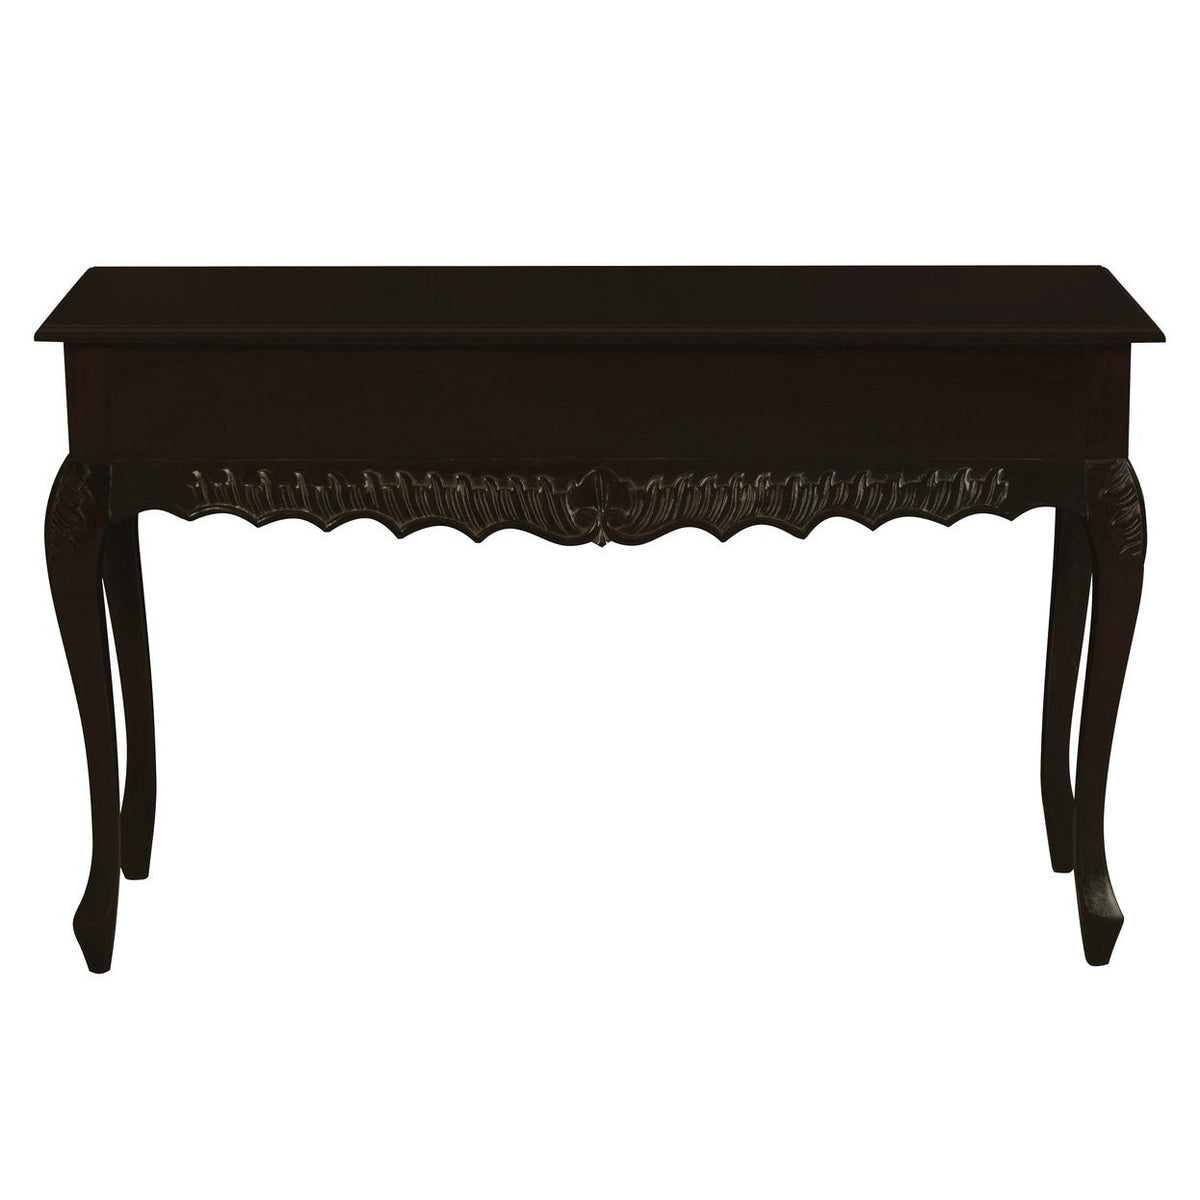 Seine Carved Sofa Table in Chocolate - 2 Drawer - Notbrand